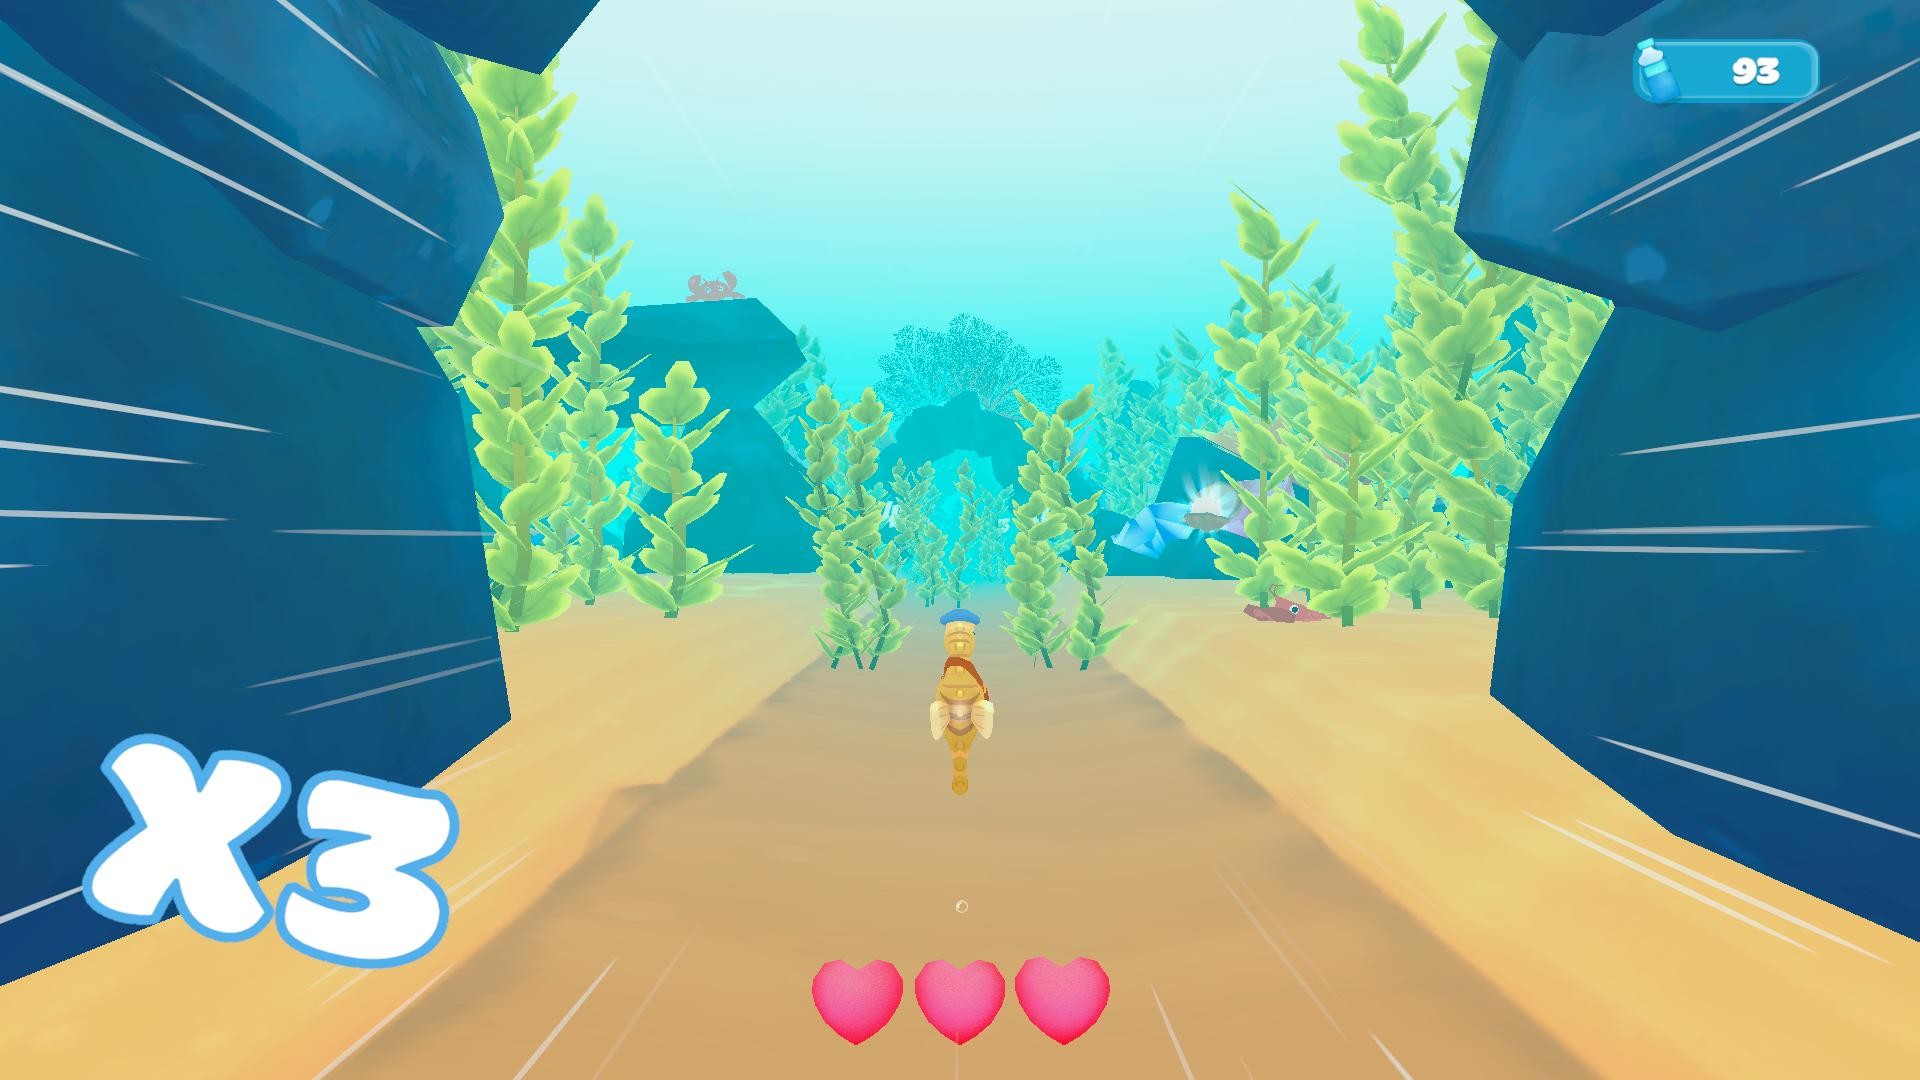 Coral Quest Free Download